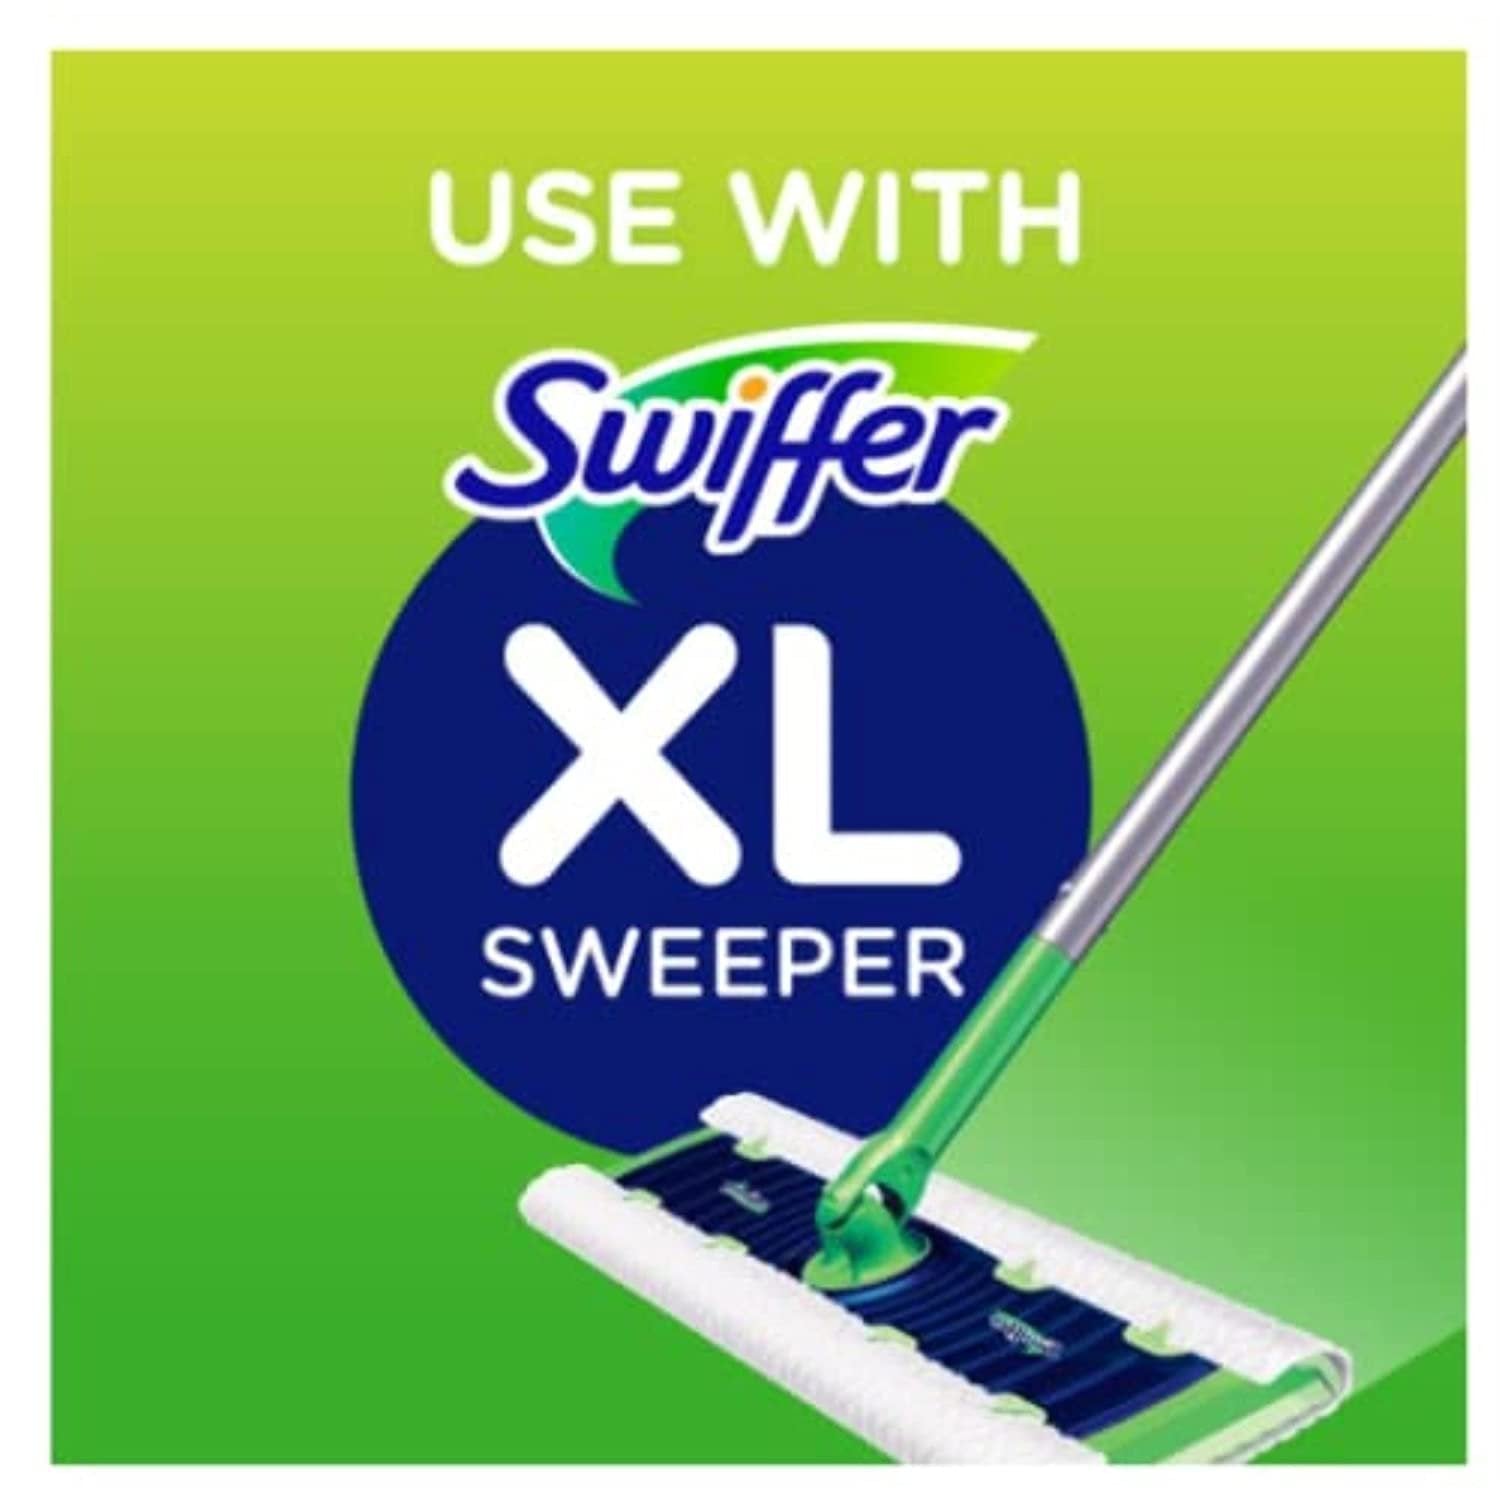 Swiffer Sweeper X-Large Disposable Sweeping Cloths, 16-Count Boxes (Pack of 3)